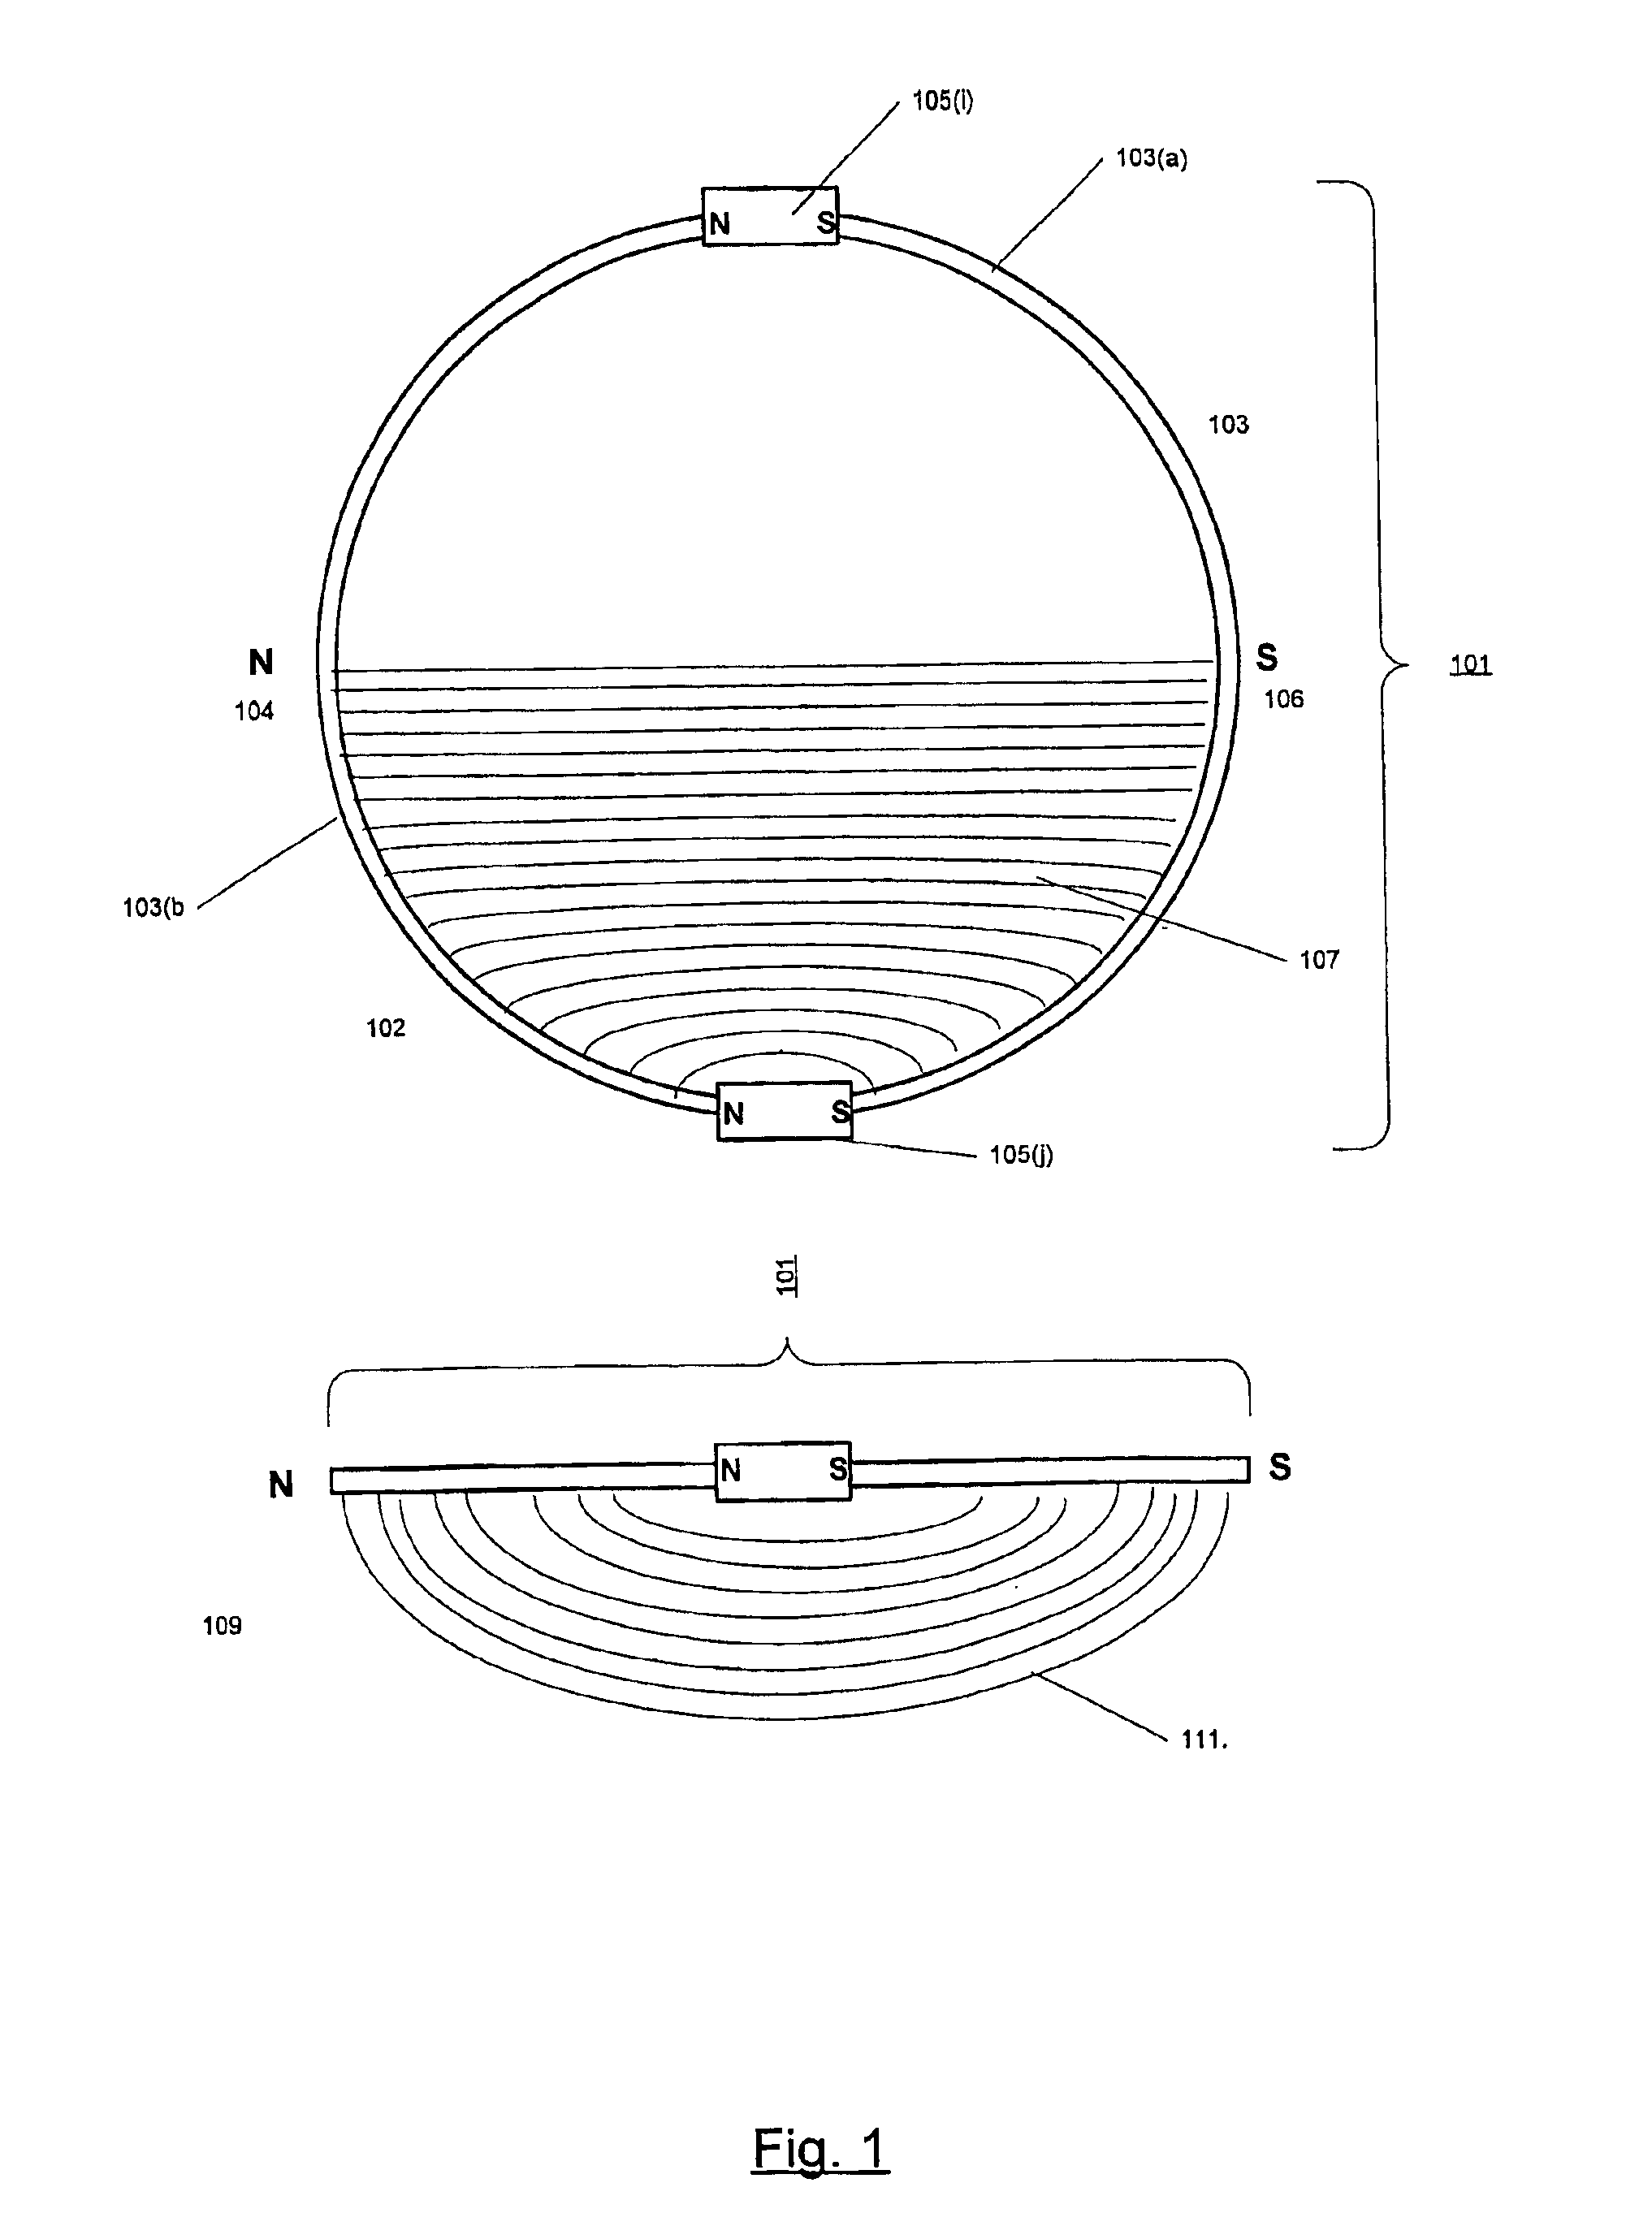 Apparatus for manipulating magnetic fields